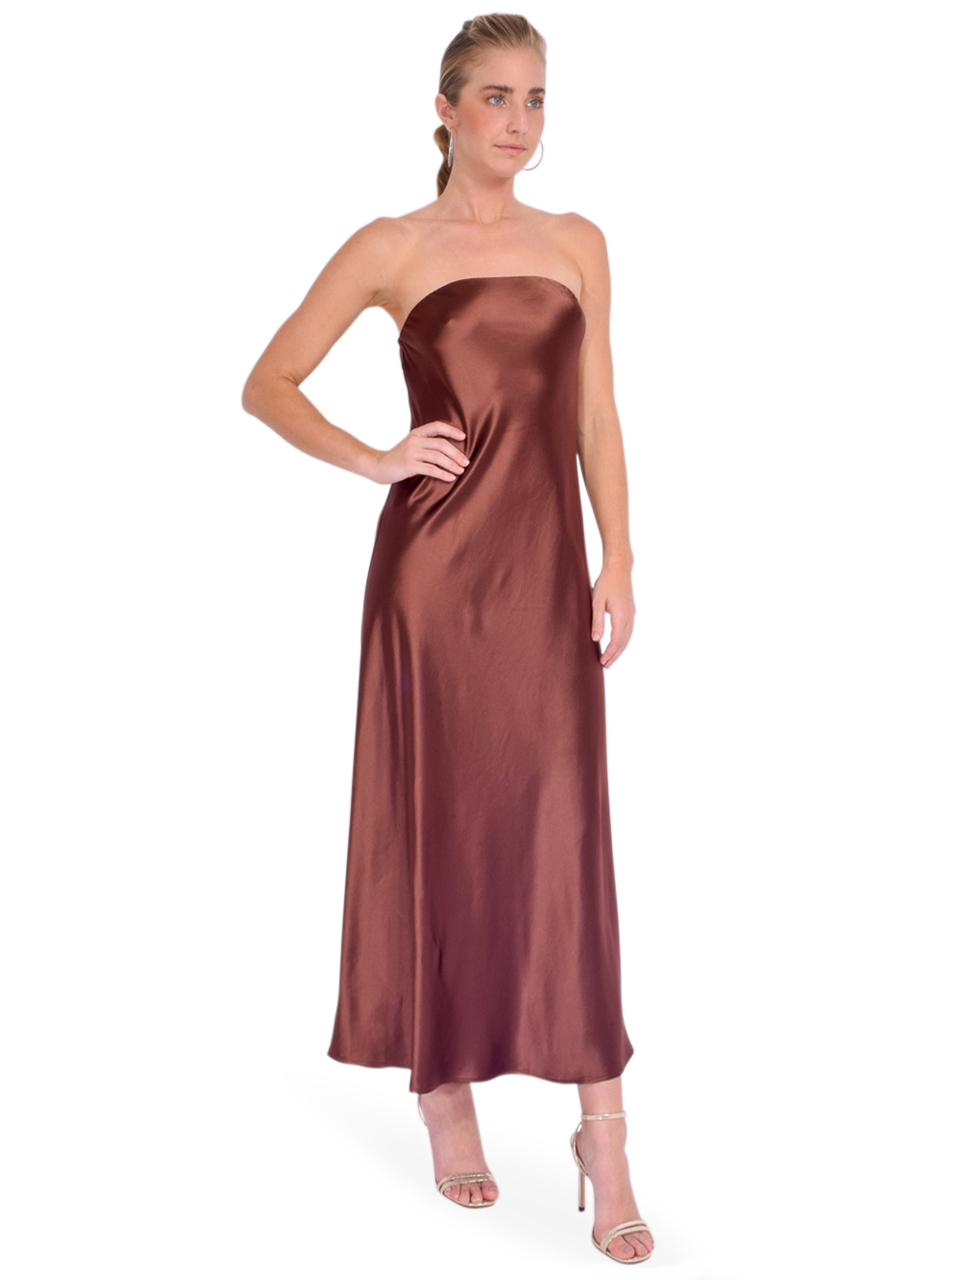 CAMI NYC Noelle Strapless Dress in Coconut Brown Side View 